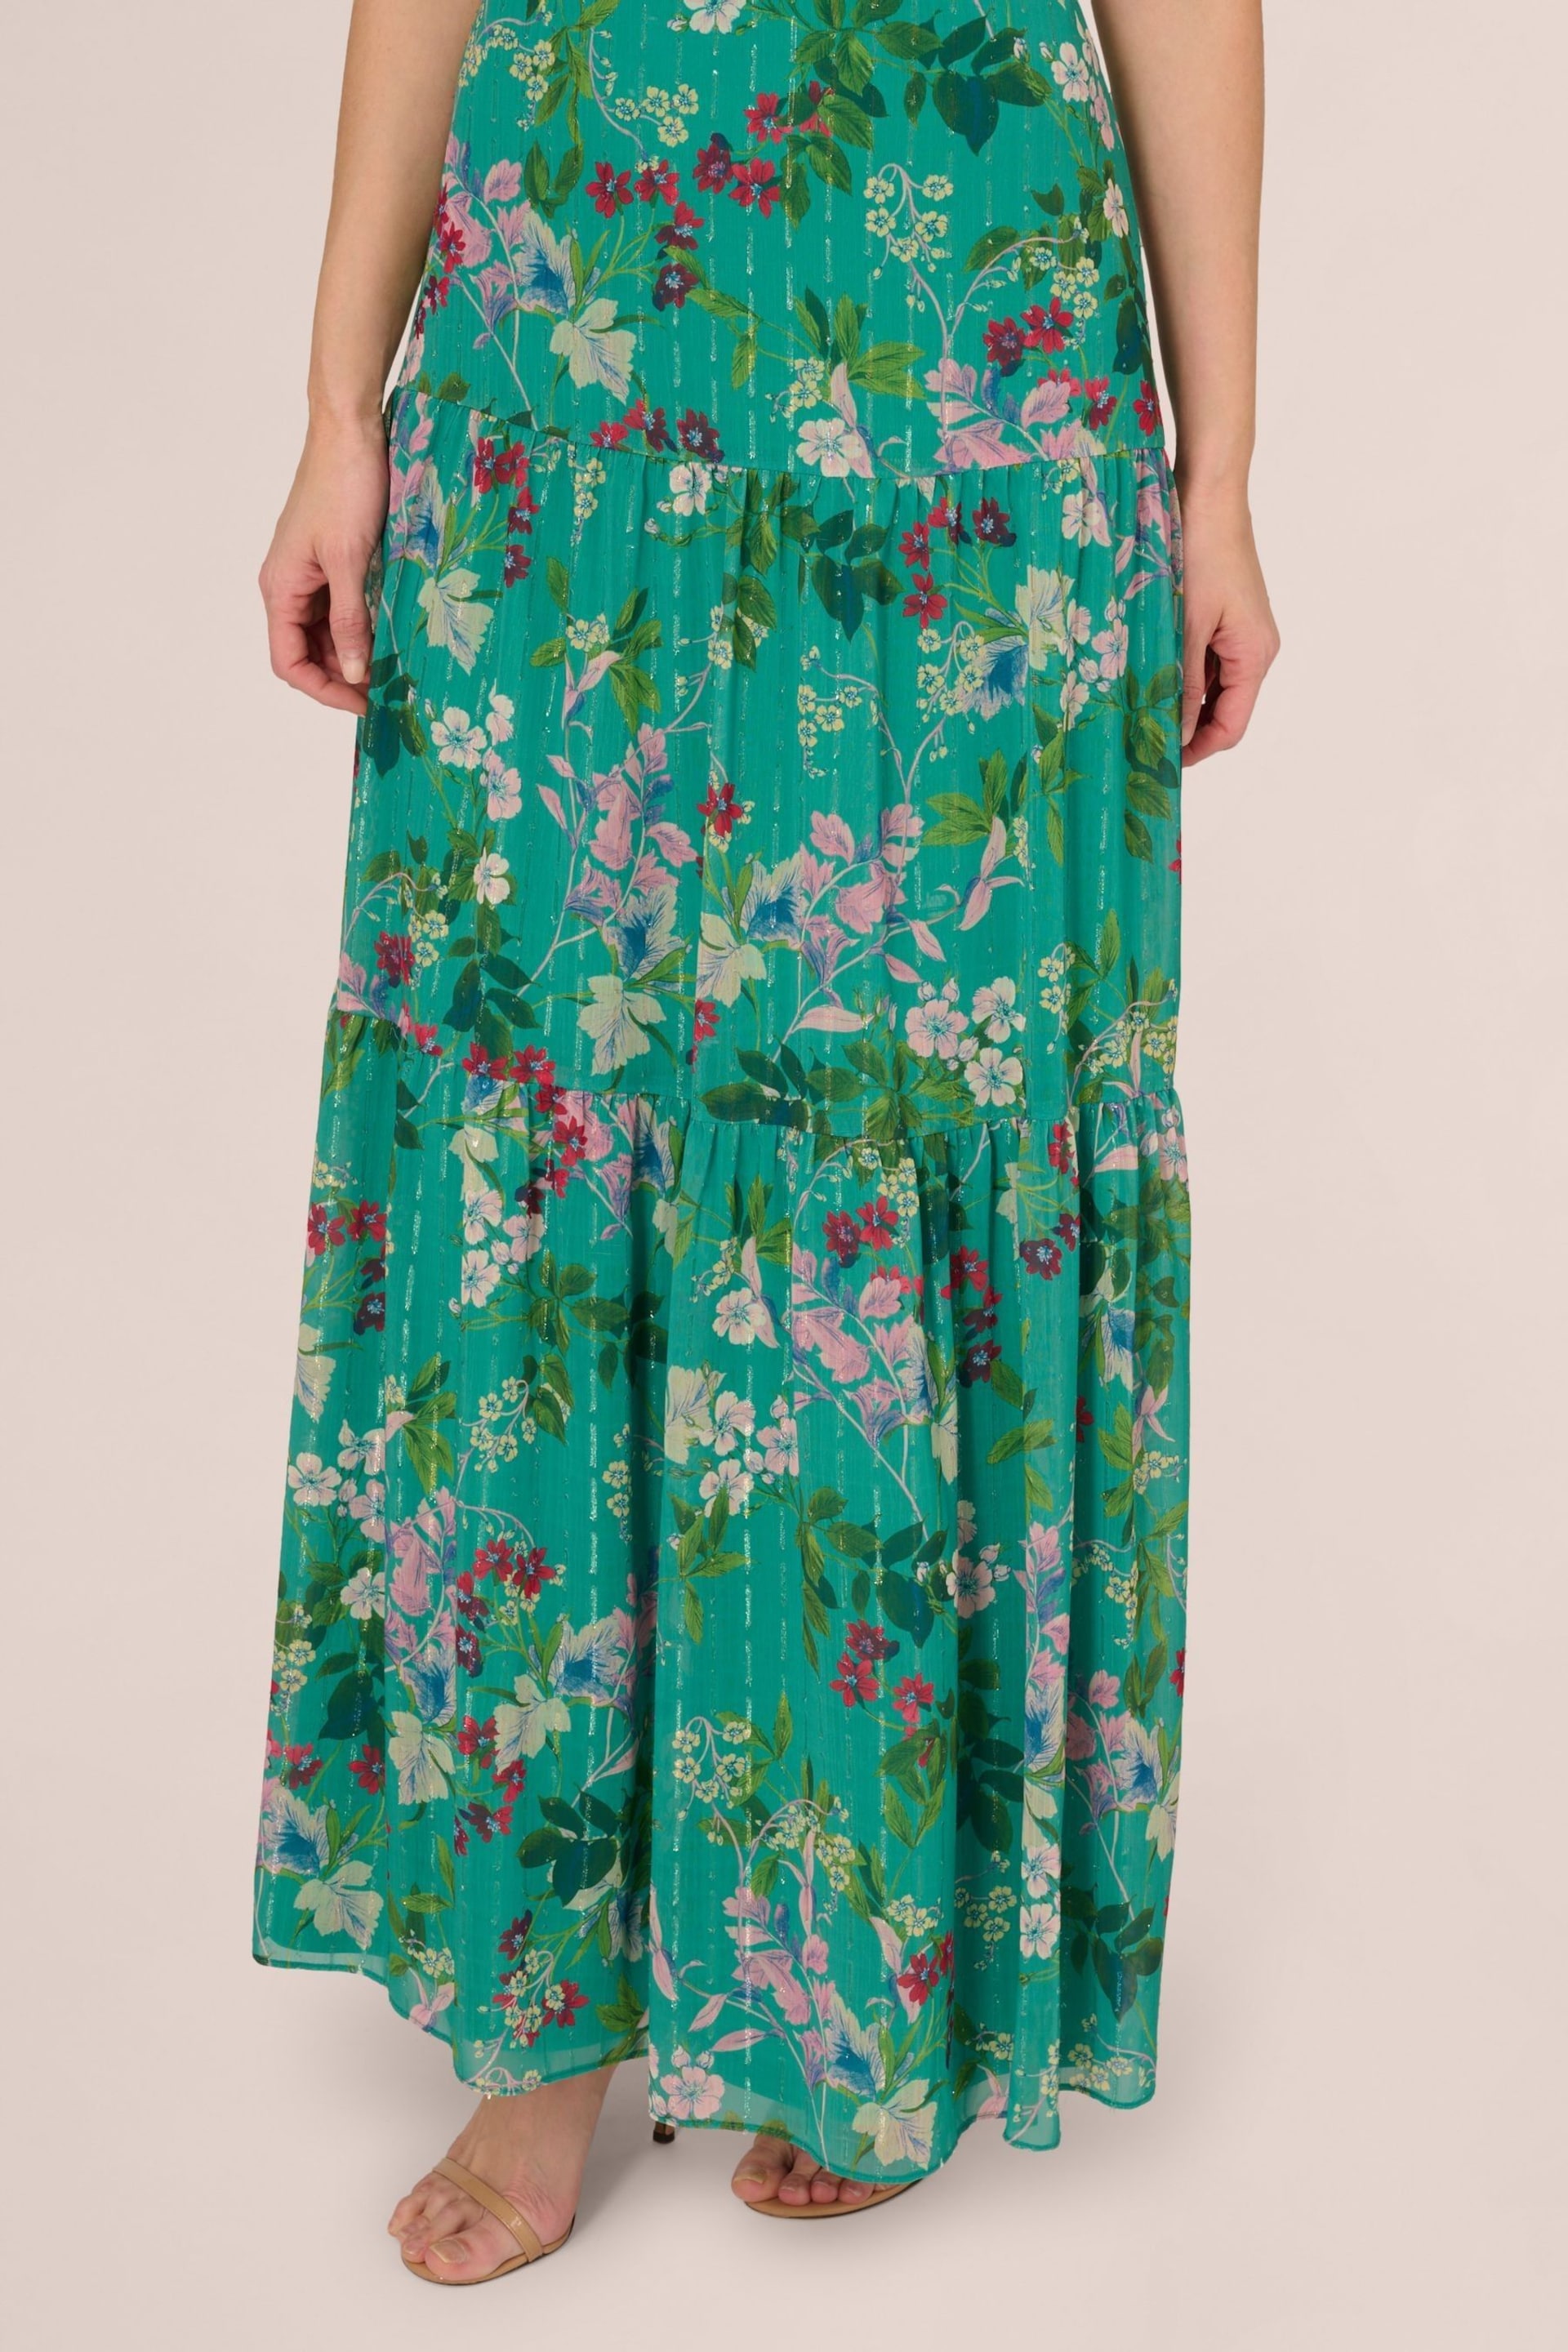 Adrianna Papell Green Print Tier Maxi Dress - Image 5 of 7